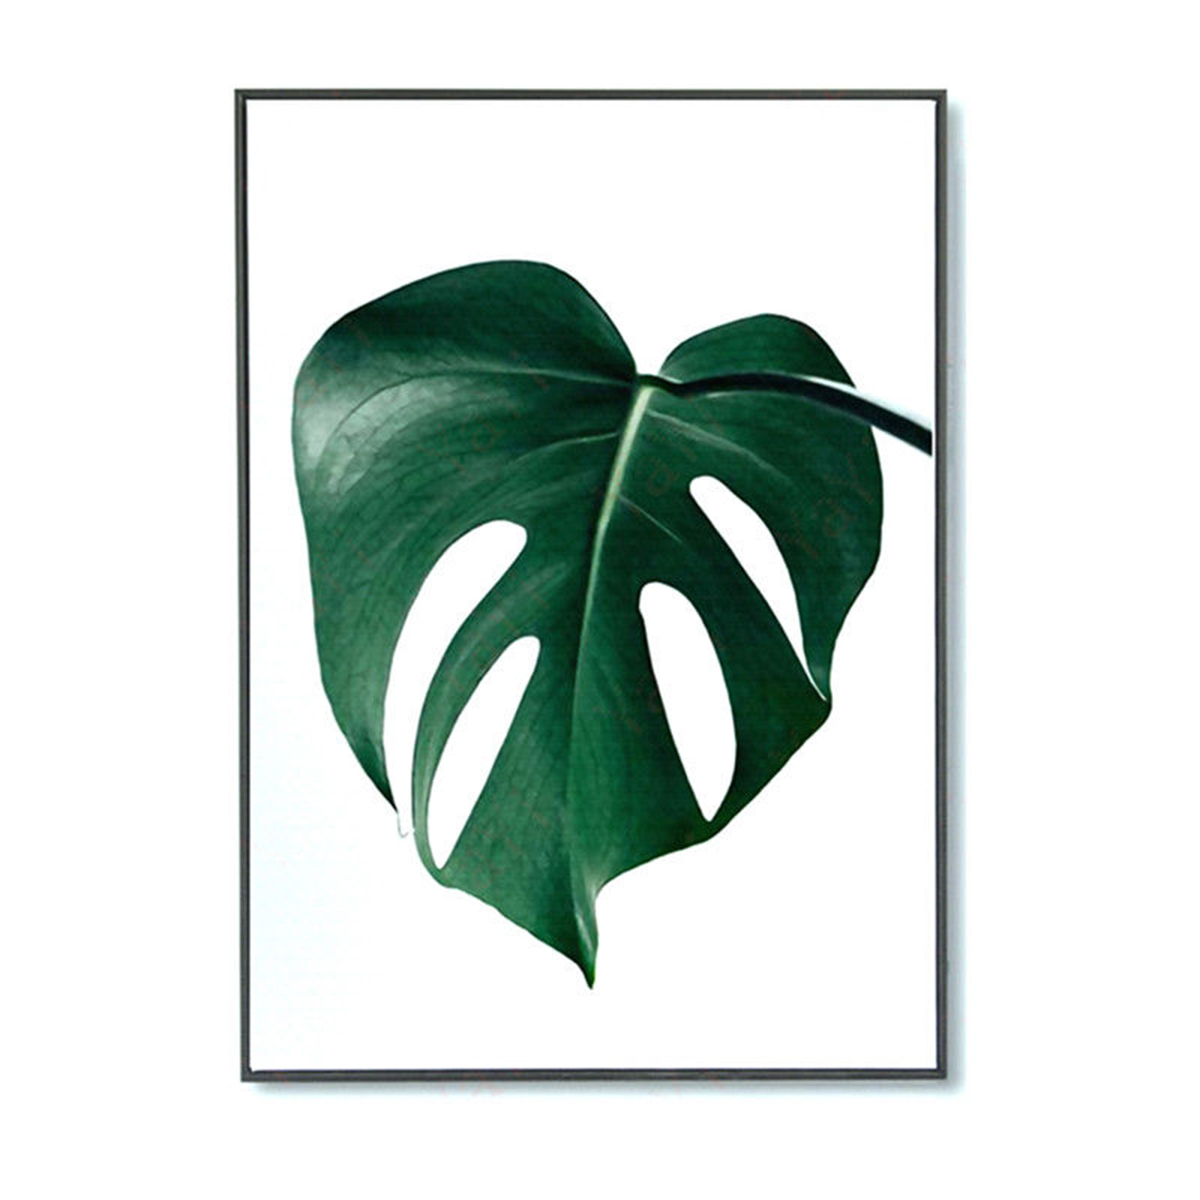 1 Piece Canvas Print Painting Nordic Green Plant Leaf Canvas Art Poster Print Wall Picture Home Decor No Frame—5